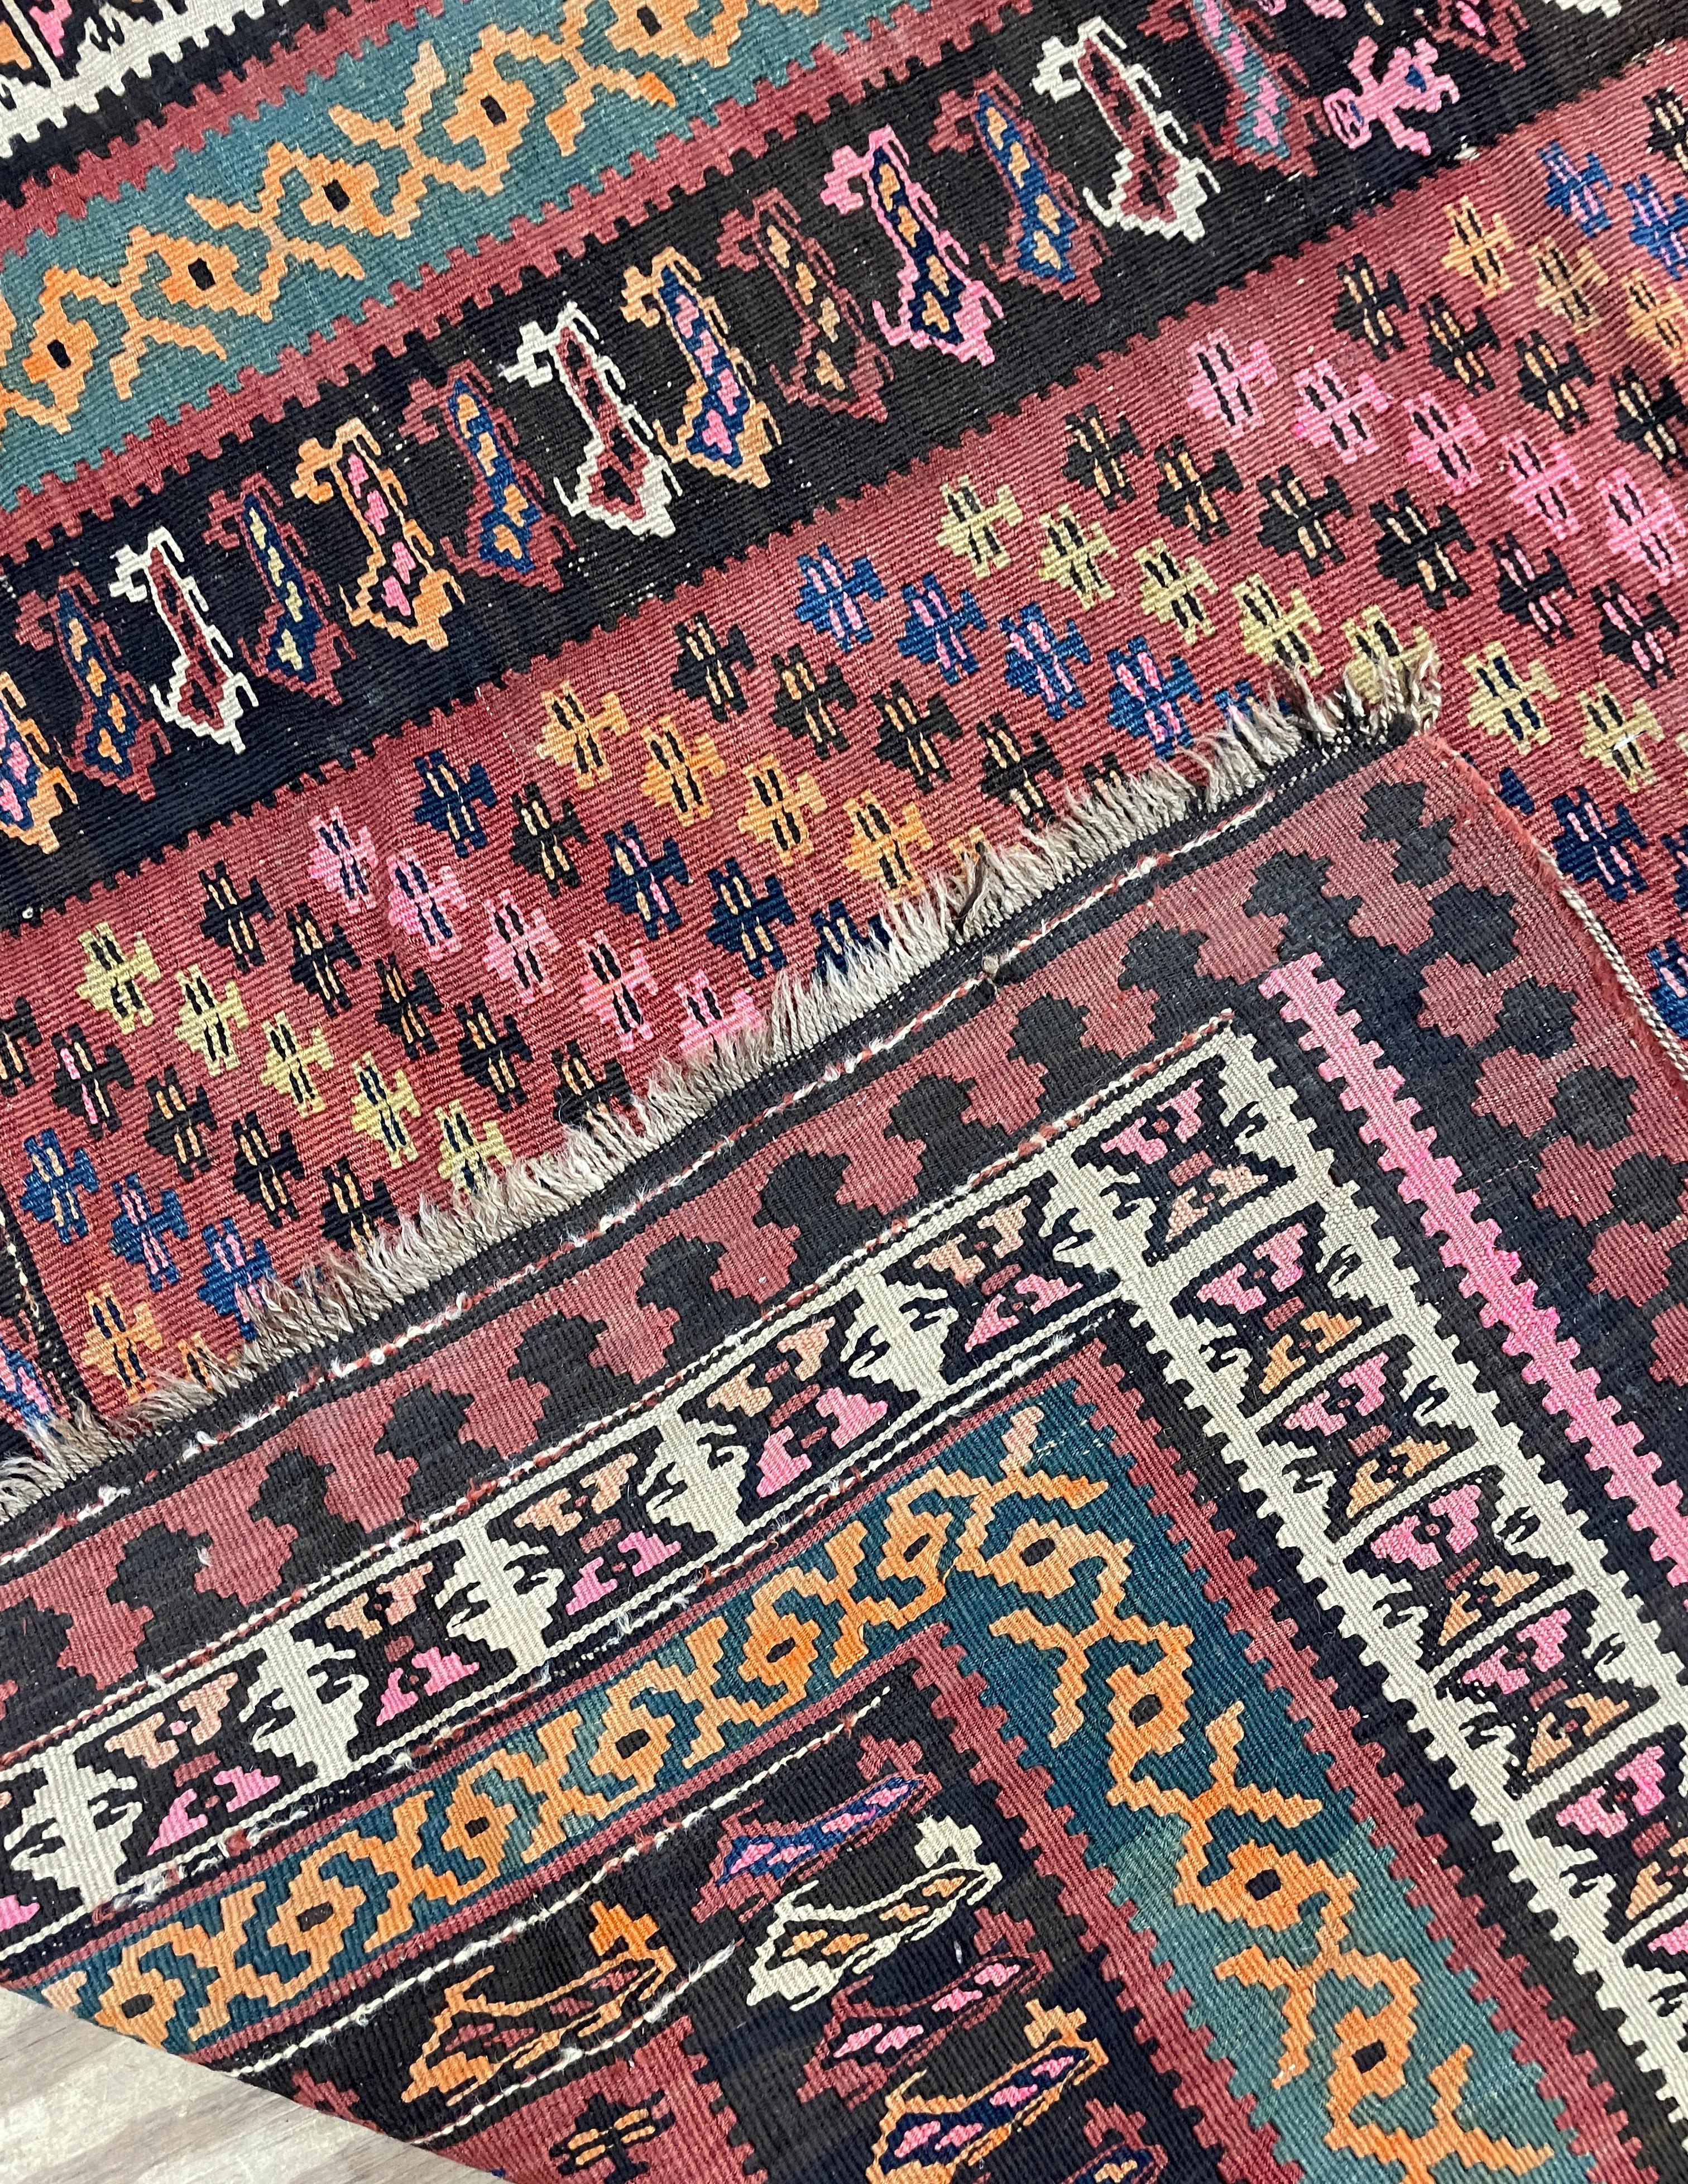 Discover the Exquisite Beauty of Antique Kurdish Kilims

Step into the world of timeless elegance with our Antique Kurdish Kilim, boasting a stunning size of 5'6